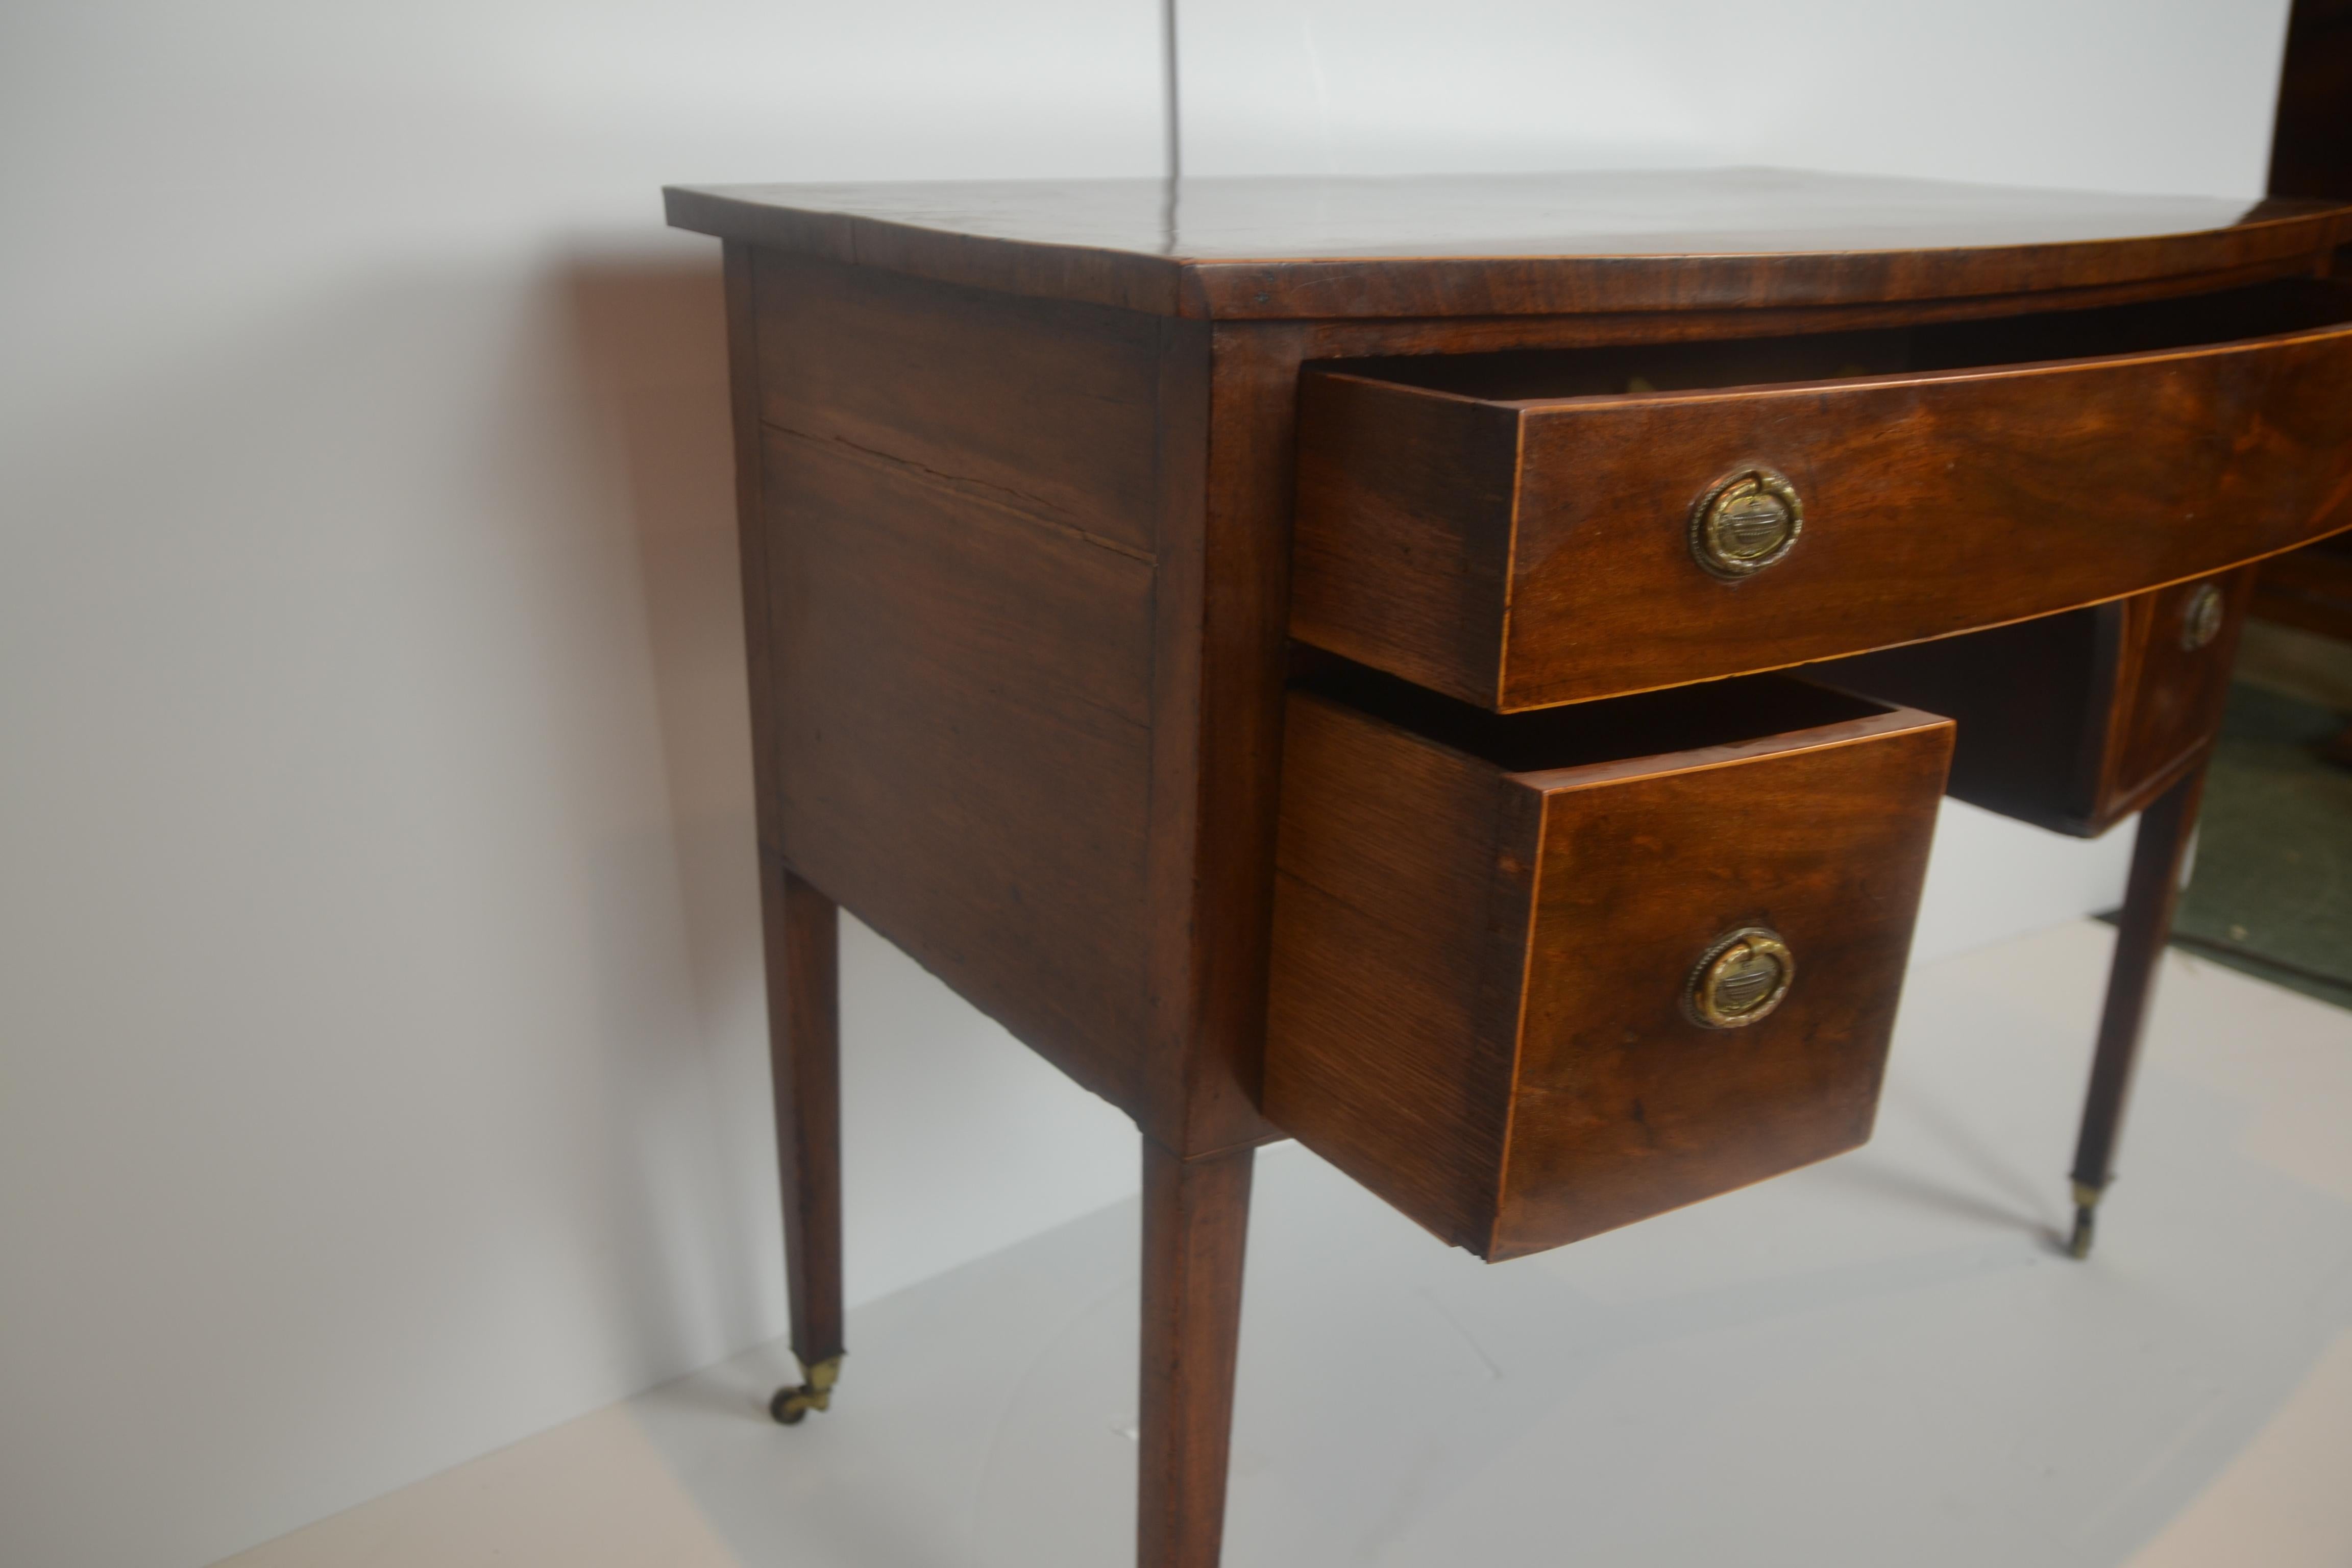 A charming small size English lowboy in old wide-grain mahogany. Drawers are oak lined and fitted with oval brass pulls decorated with an urn. Lower legs and top edge are string inlaid. Feet have brass toe-caps and castors. c.1790.